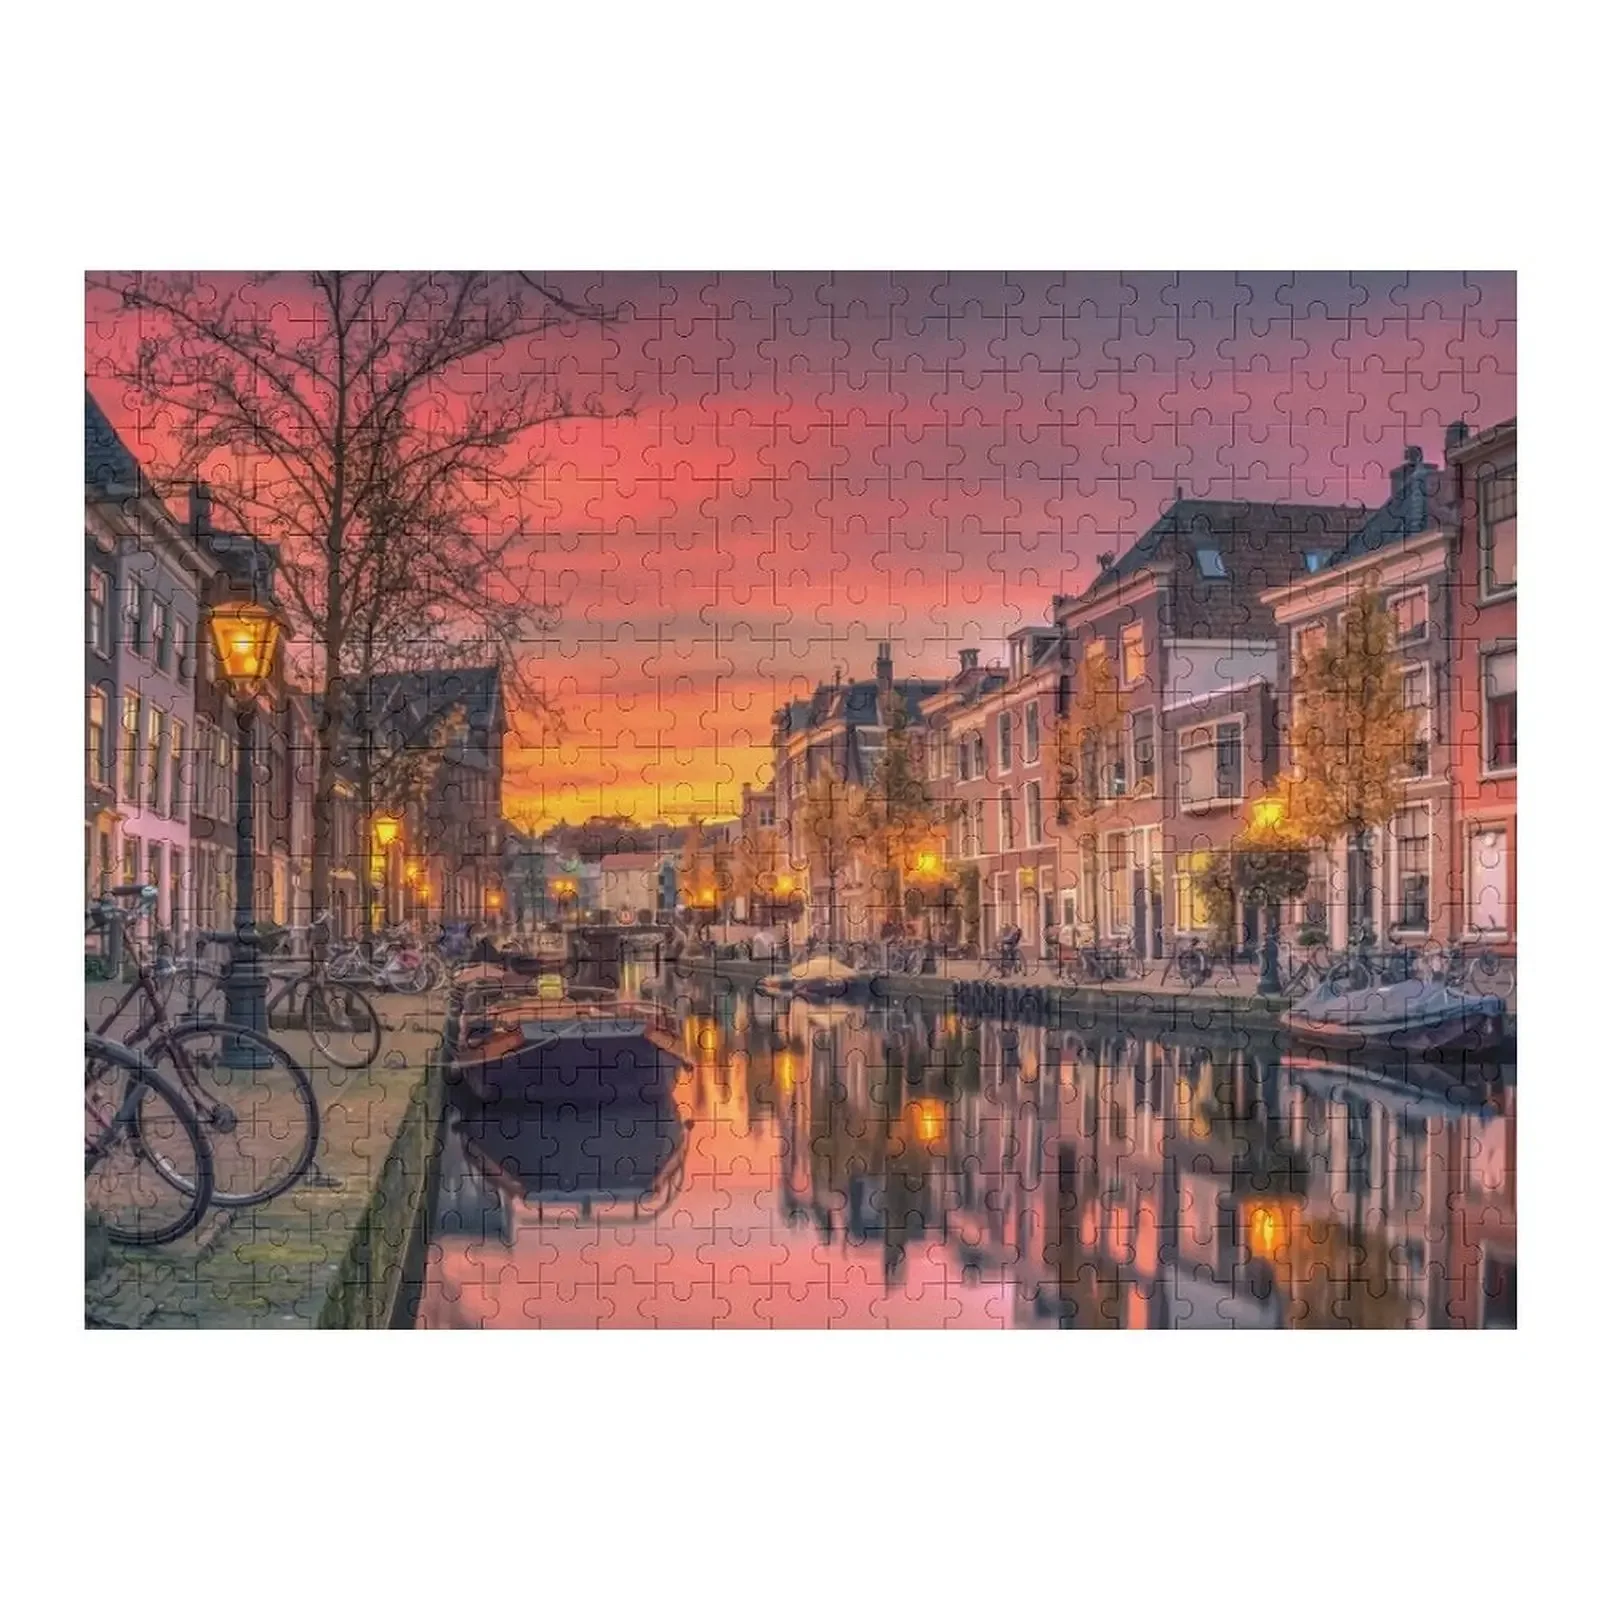 Netherlands Holland Jigsaw Puzzle Iq Custom Name Child Toy Customized Toys For Kids Works Of Art Puzzle greetings from cyprus vintage style retro souvenir jigsaw puzzle picture works of art personalised custom photo puzzle